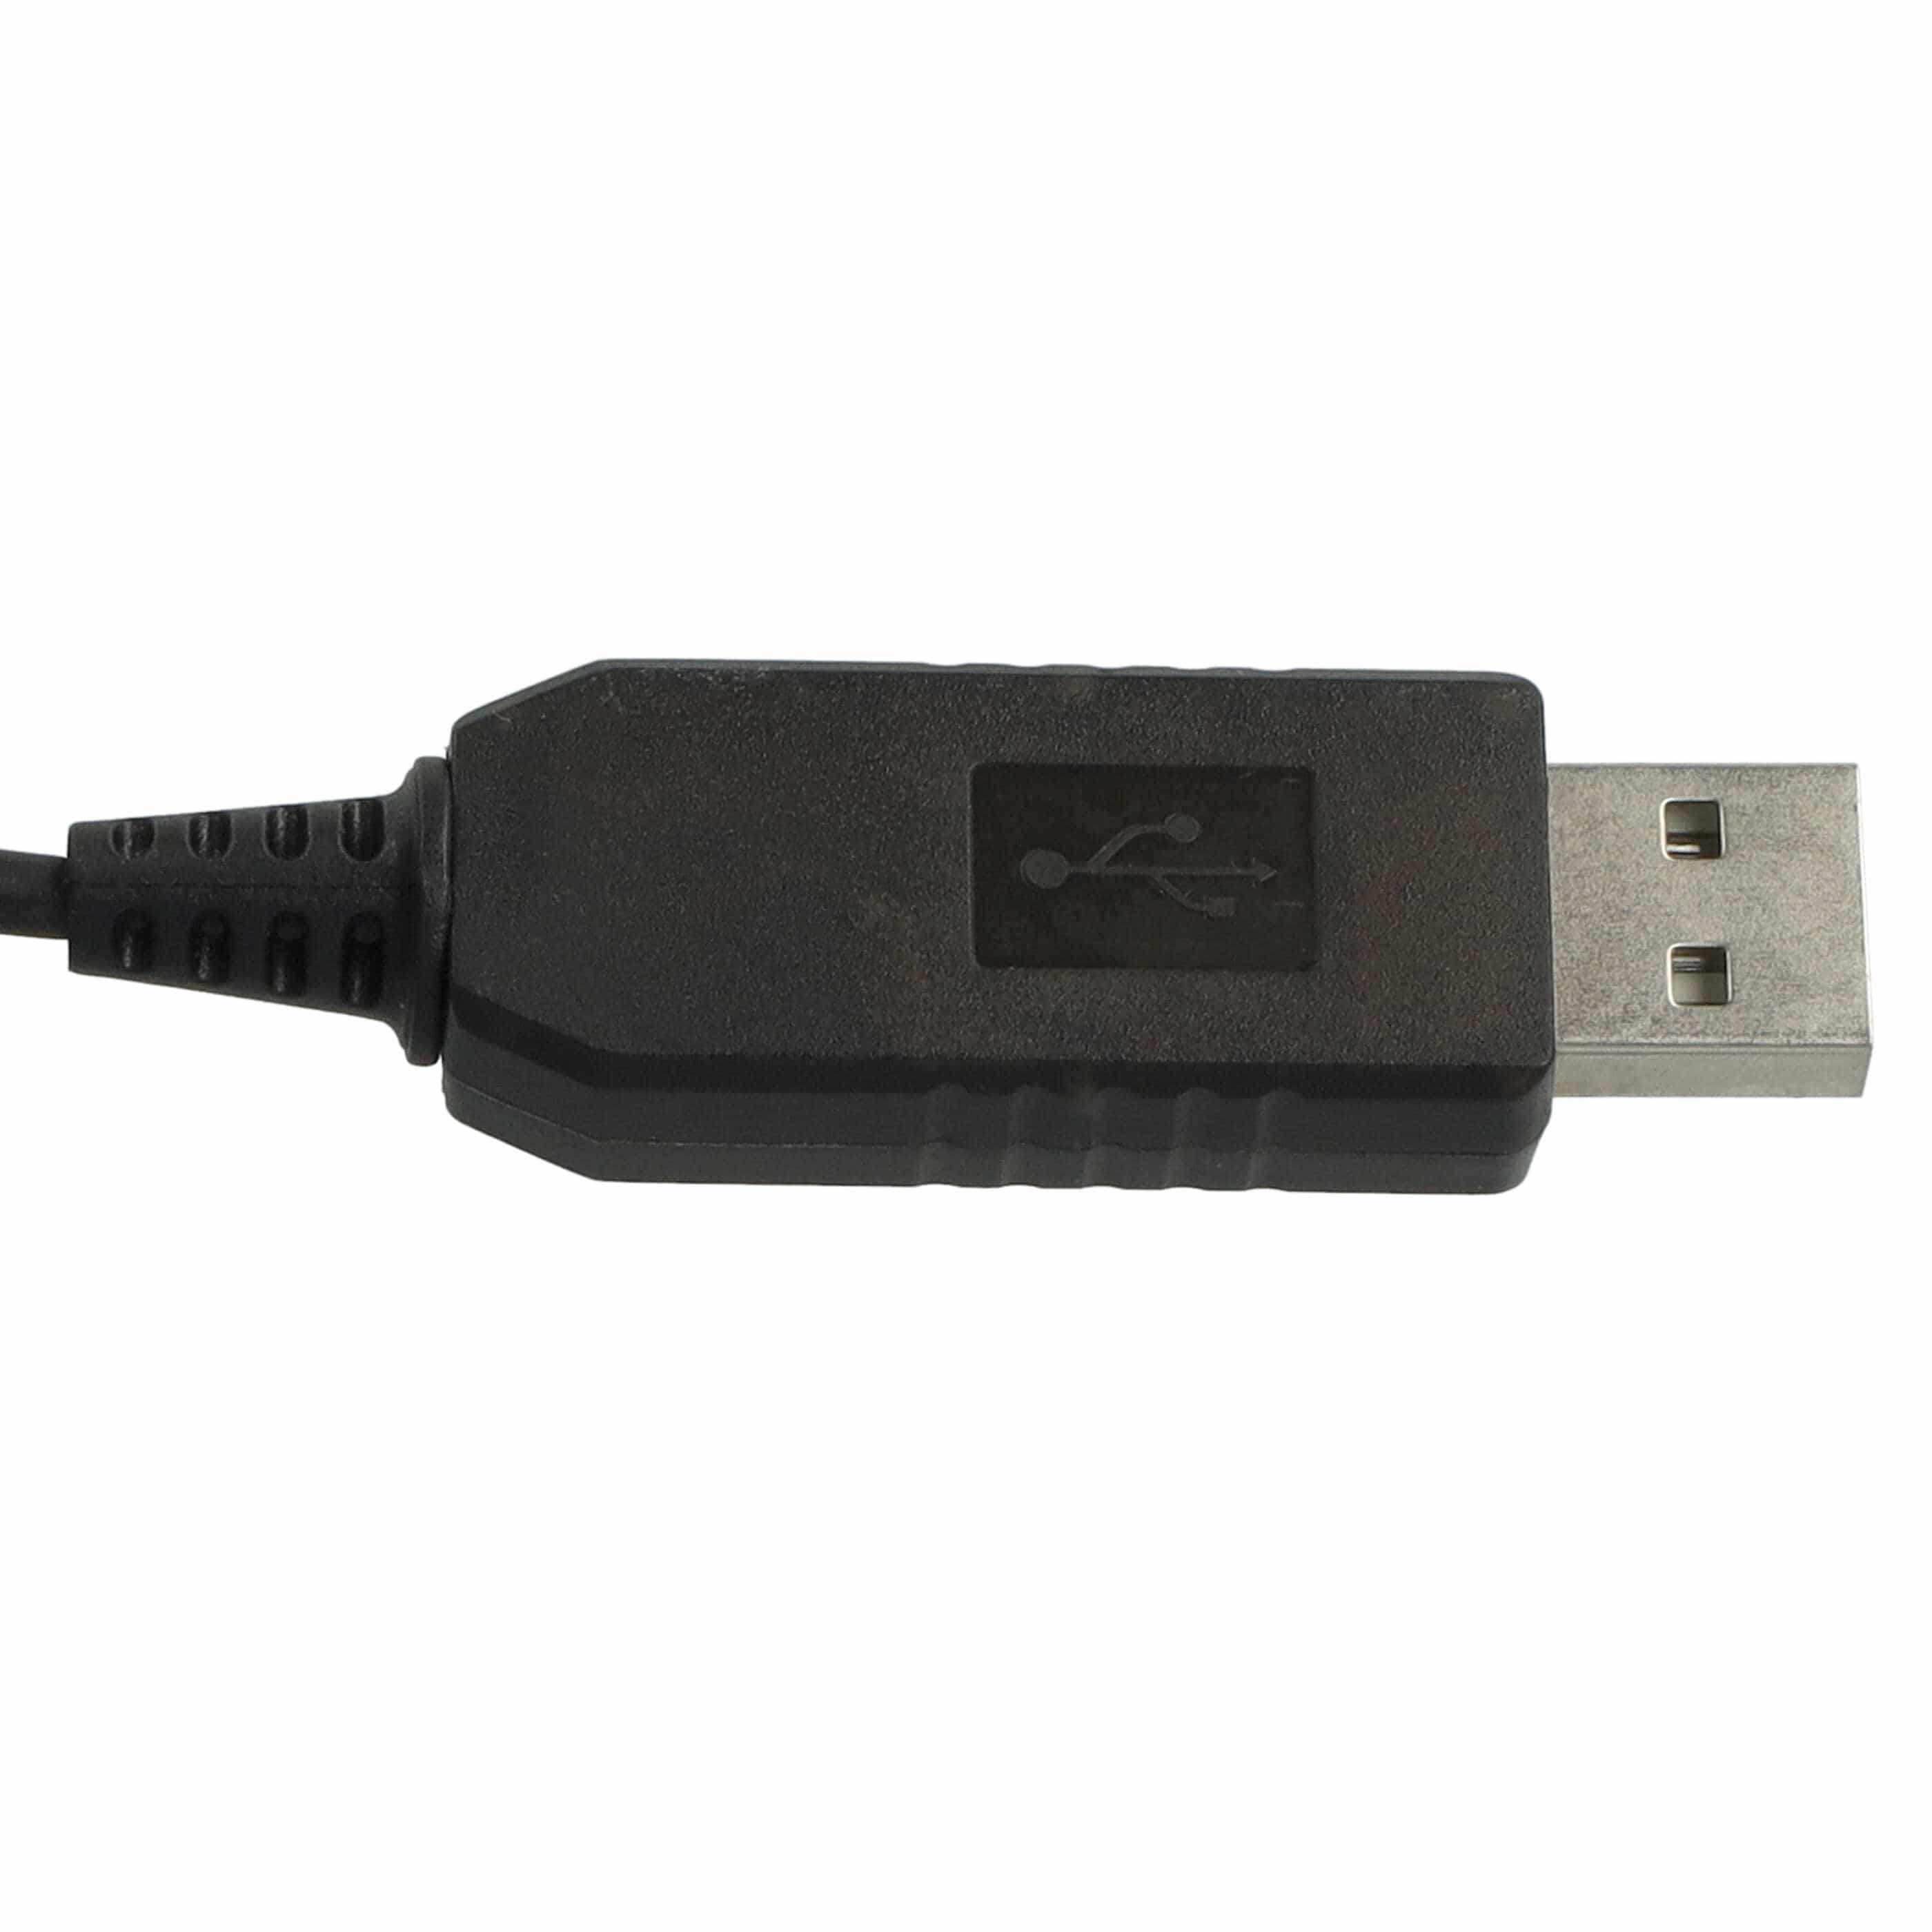 USB Charging Cable suitable for Philips S510 Shaver - 120 cm